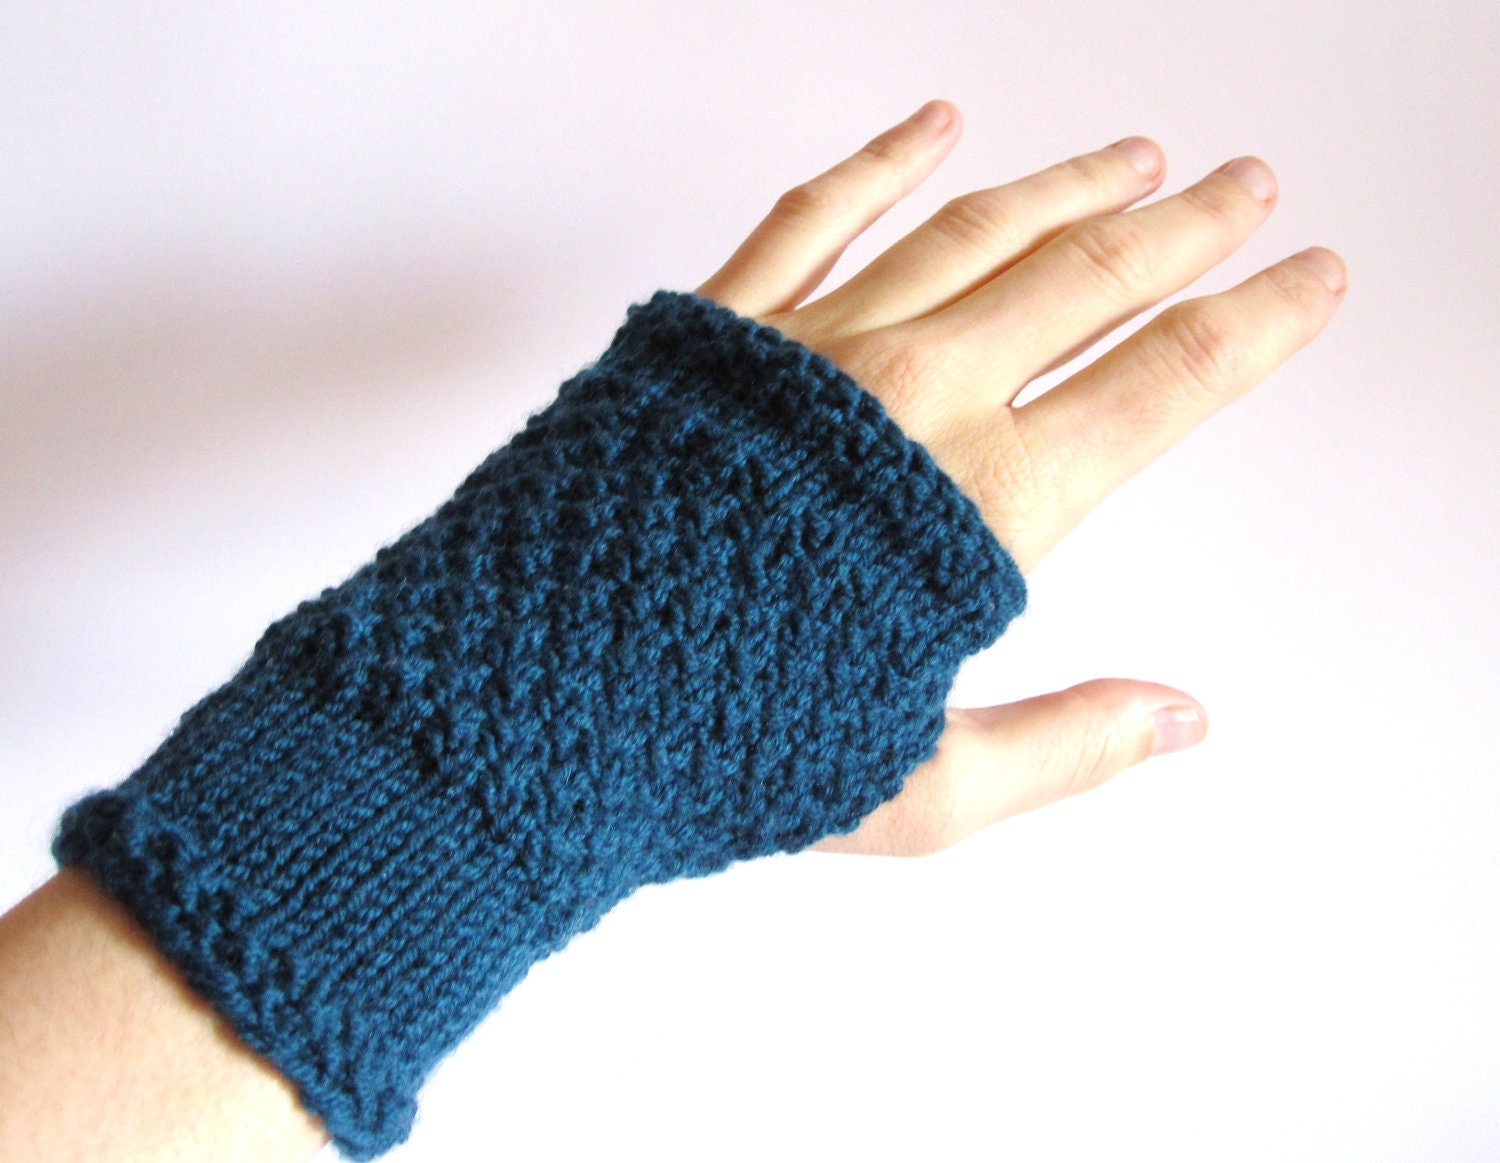 knitted hand warmers